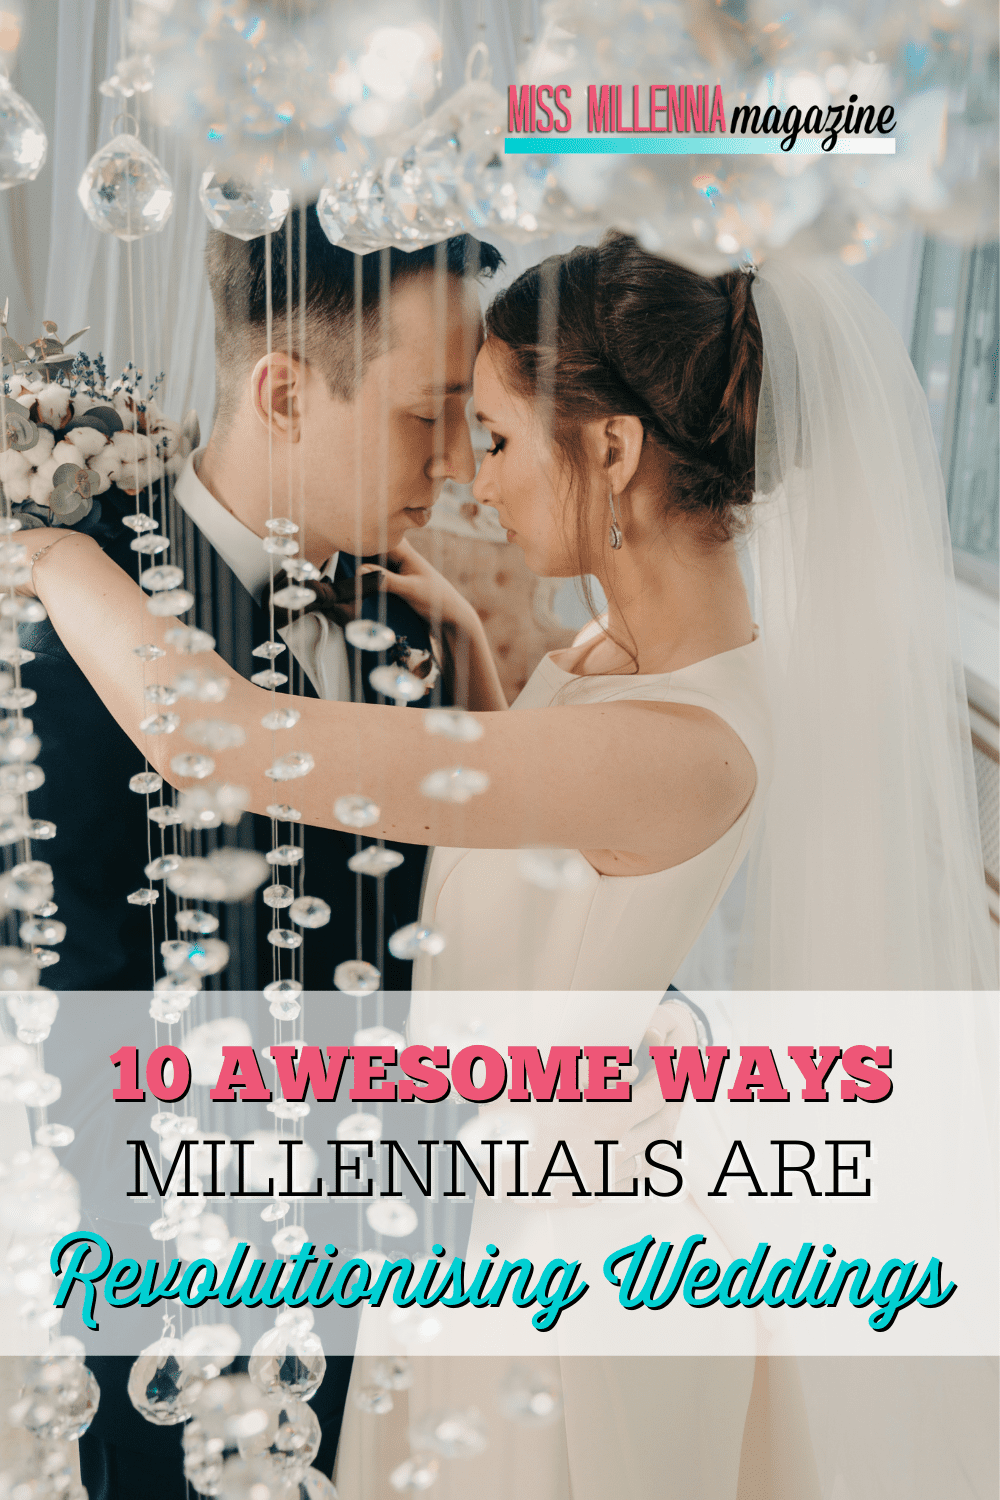 10 Awesome Ways Millennials are Revolutionising Weddings